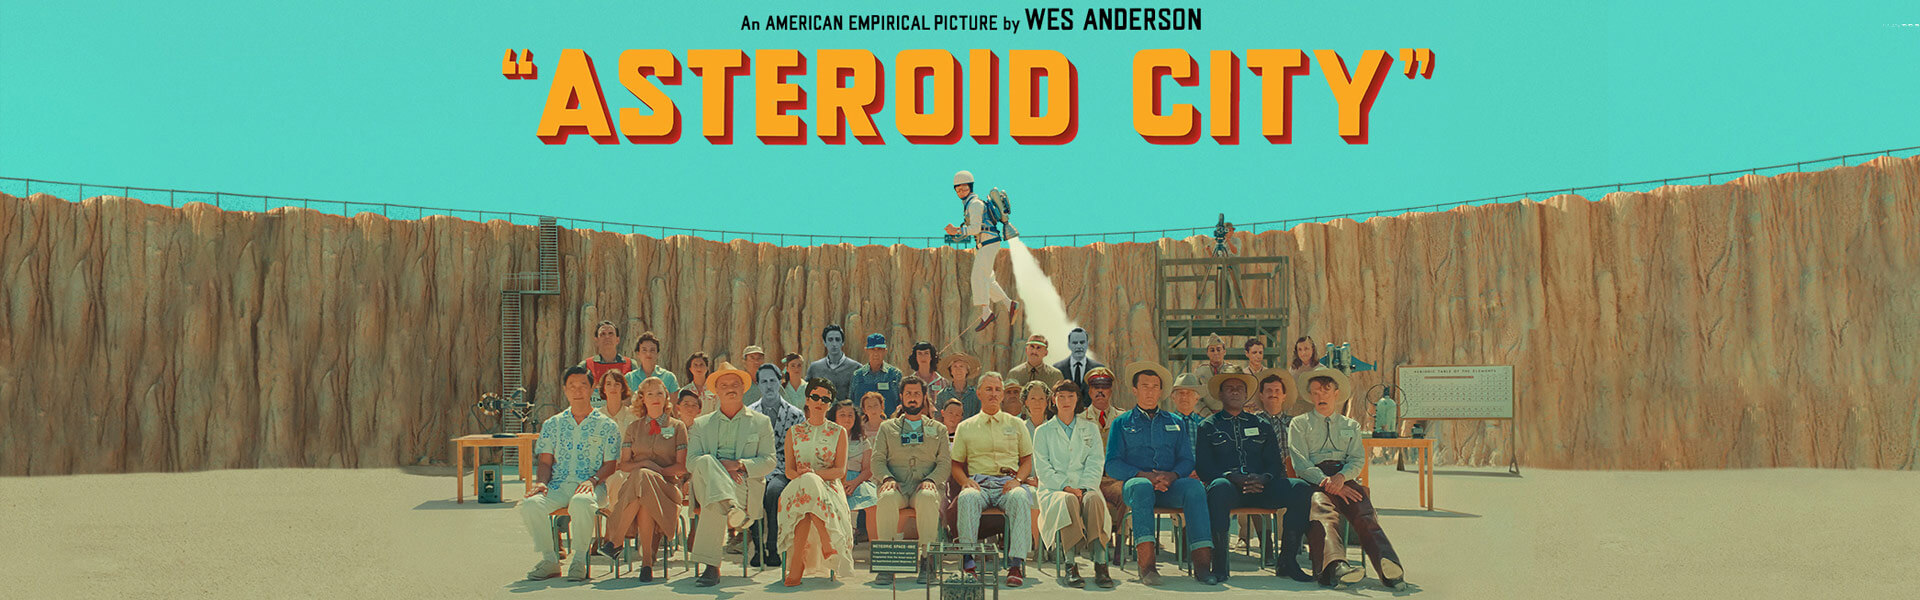 Asteroid City | Cannes 76